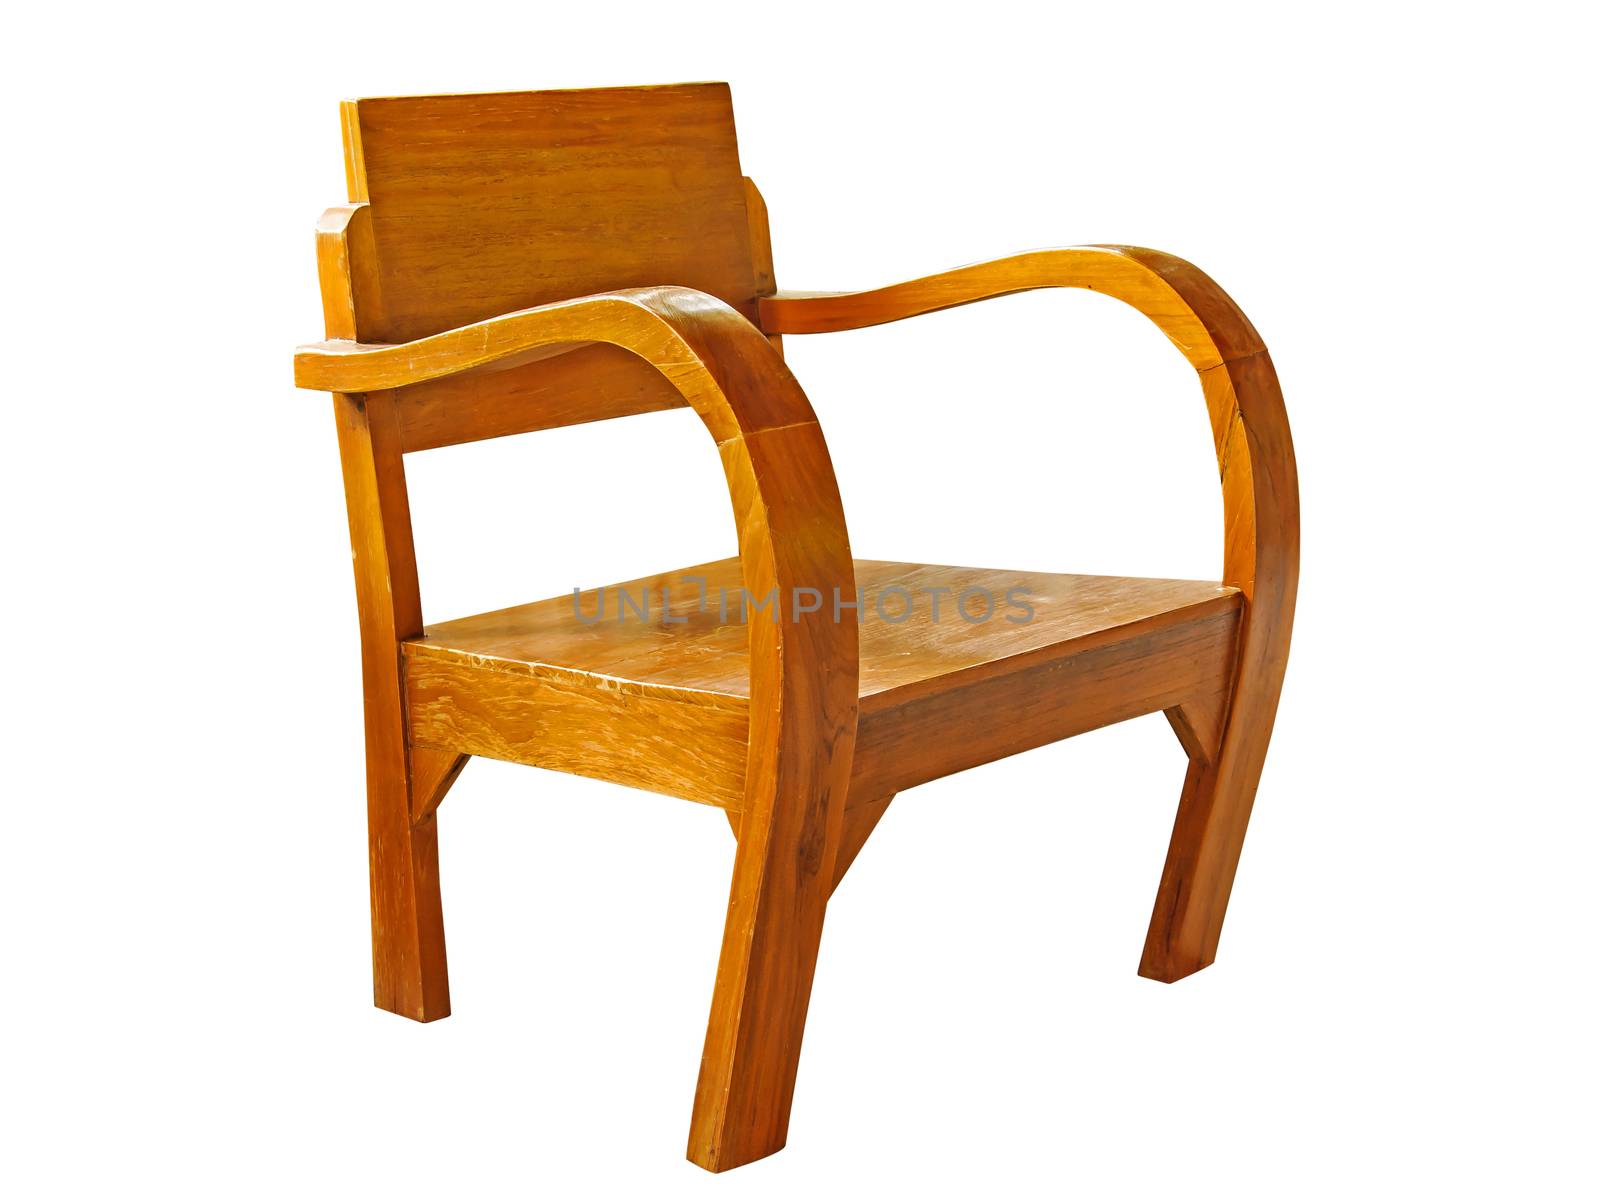 Wooden arm chair by NuwatPhoto